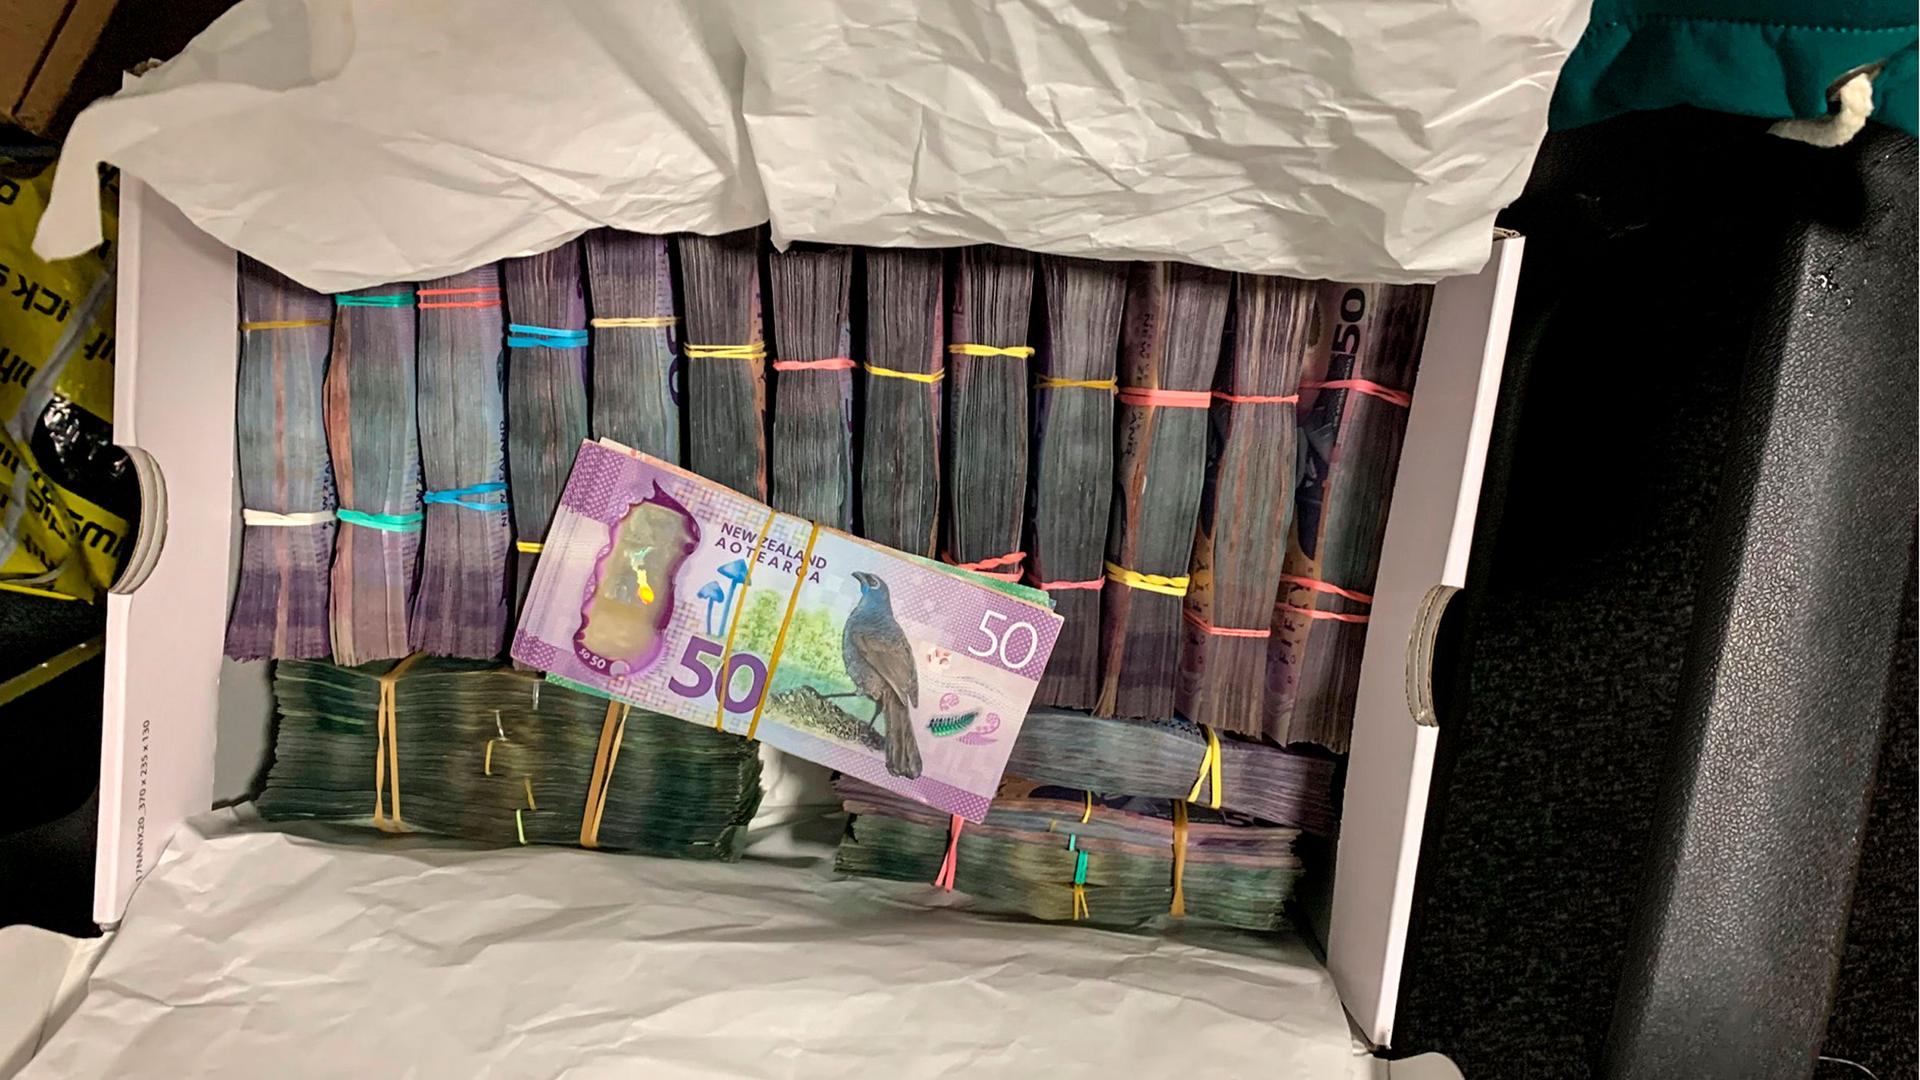 A box containing stacks of cash with a 50 note stack from New Zealand on top